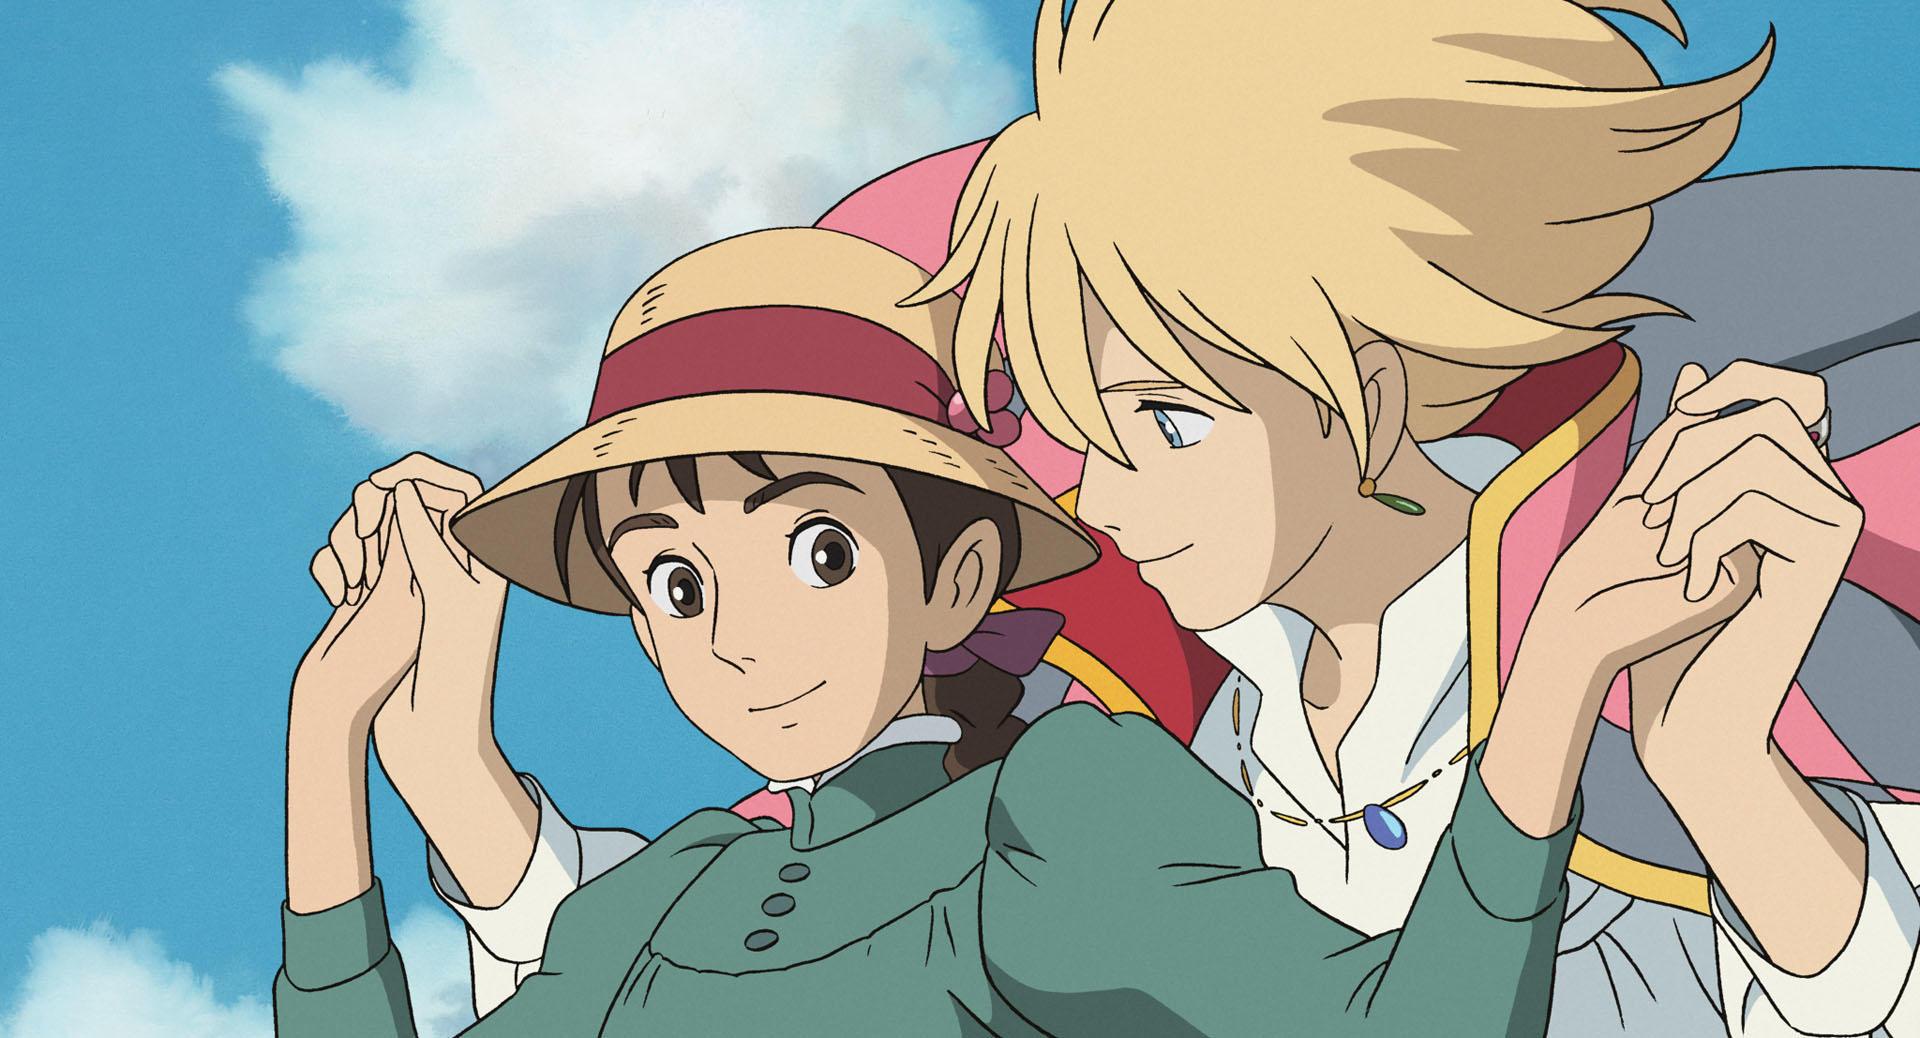 Studio Ghibli to receive honorary Palme d’Or at Cannes